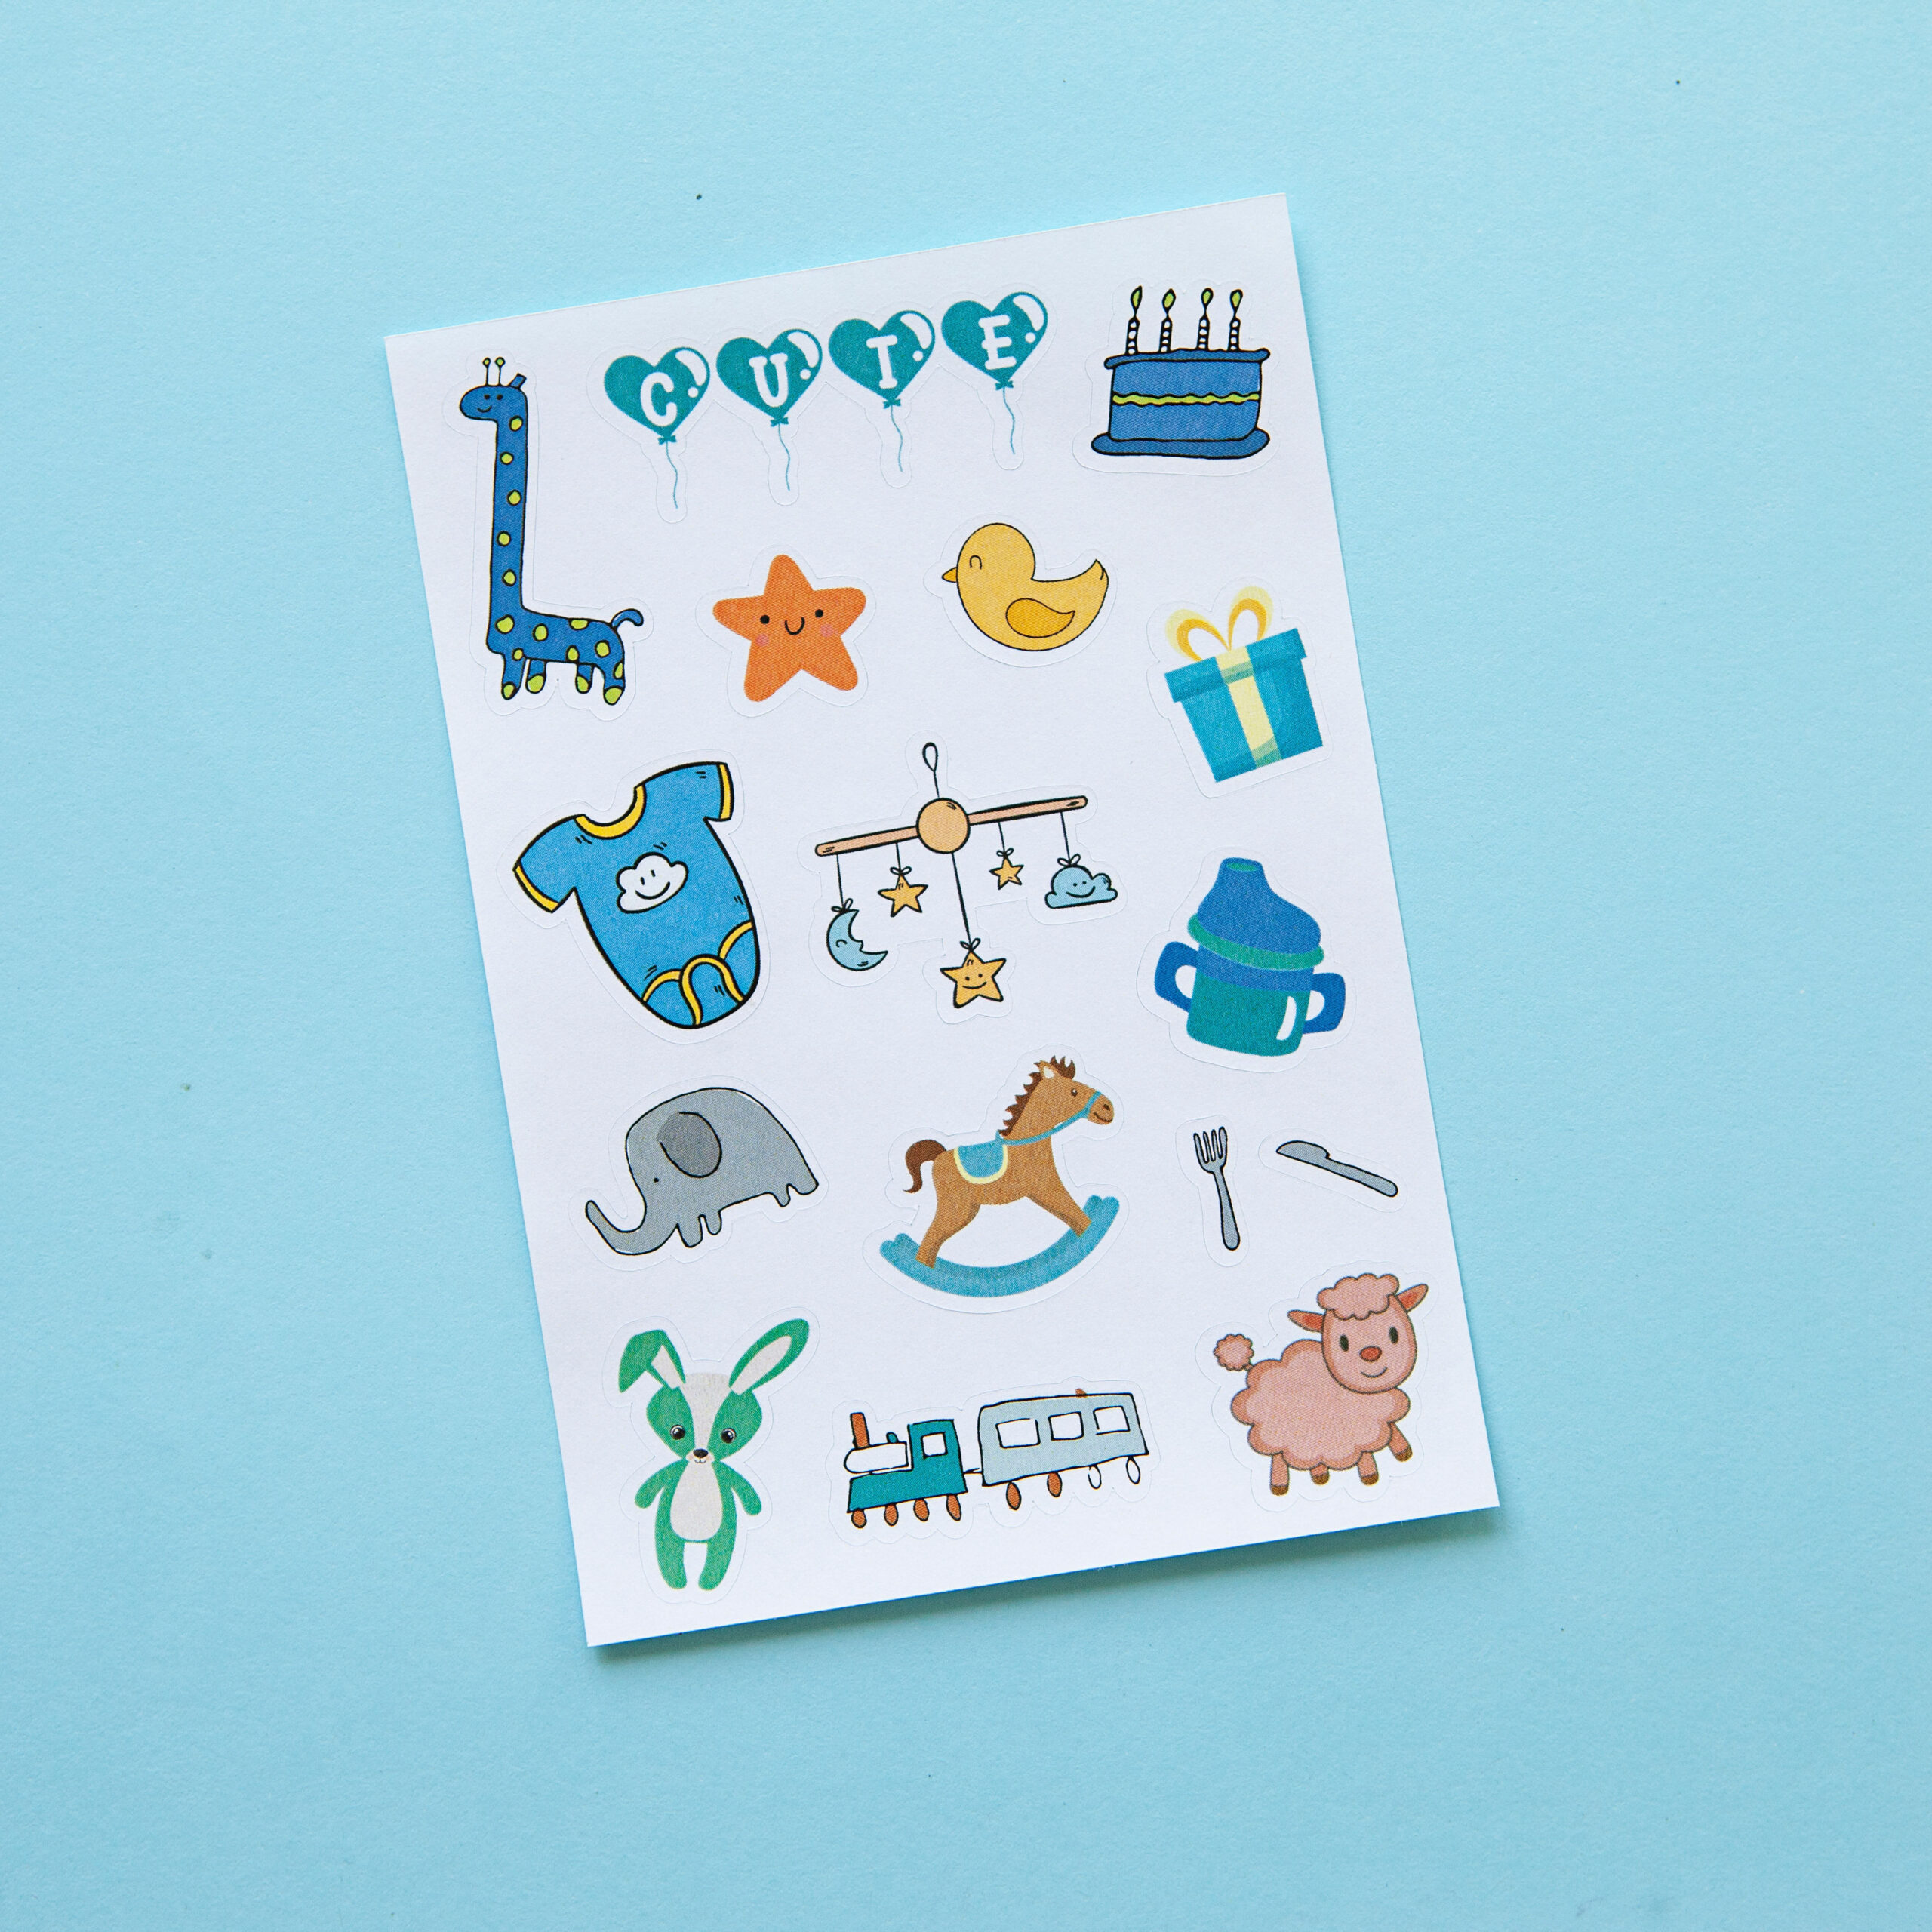 New Baby Boy Scrapbook Stickers and Accessories Gift Set